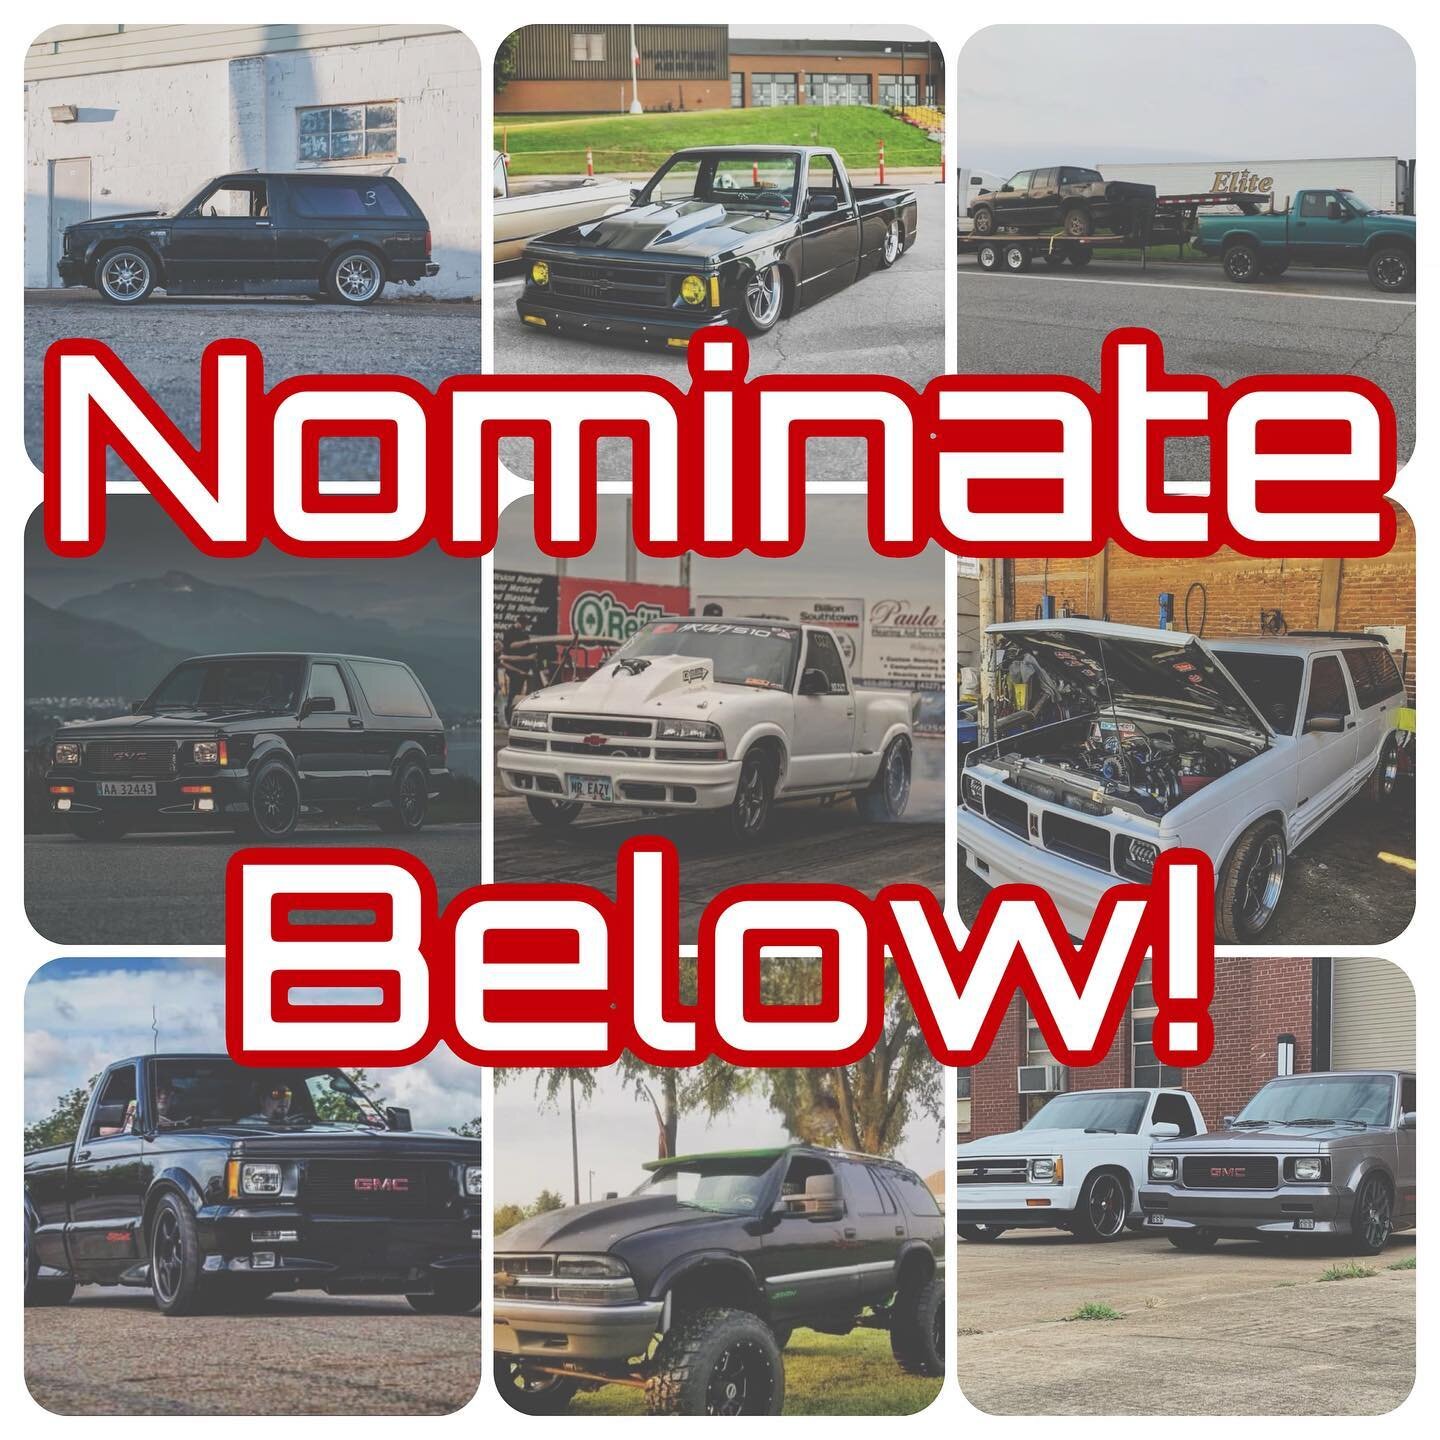 🗳️❗️Nominate in the comments❗️🗳️

It&rsquo;s been our tradition every January to host a contest for Truck &amp; SUV of the Year

Usually we do a poll on the story but this time we&rsquo;re gonna do it like this:

1. Nominate someone by tagging them